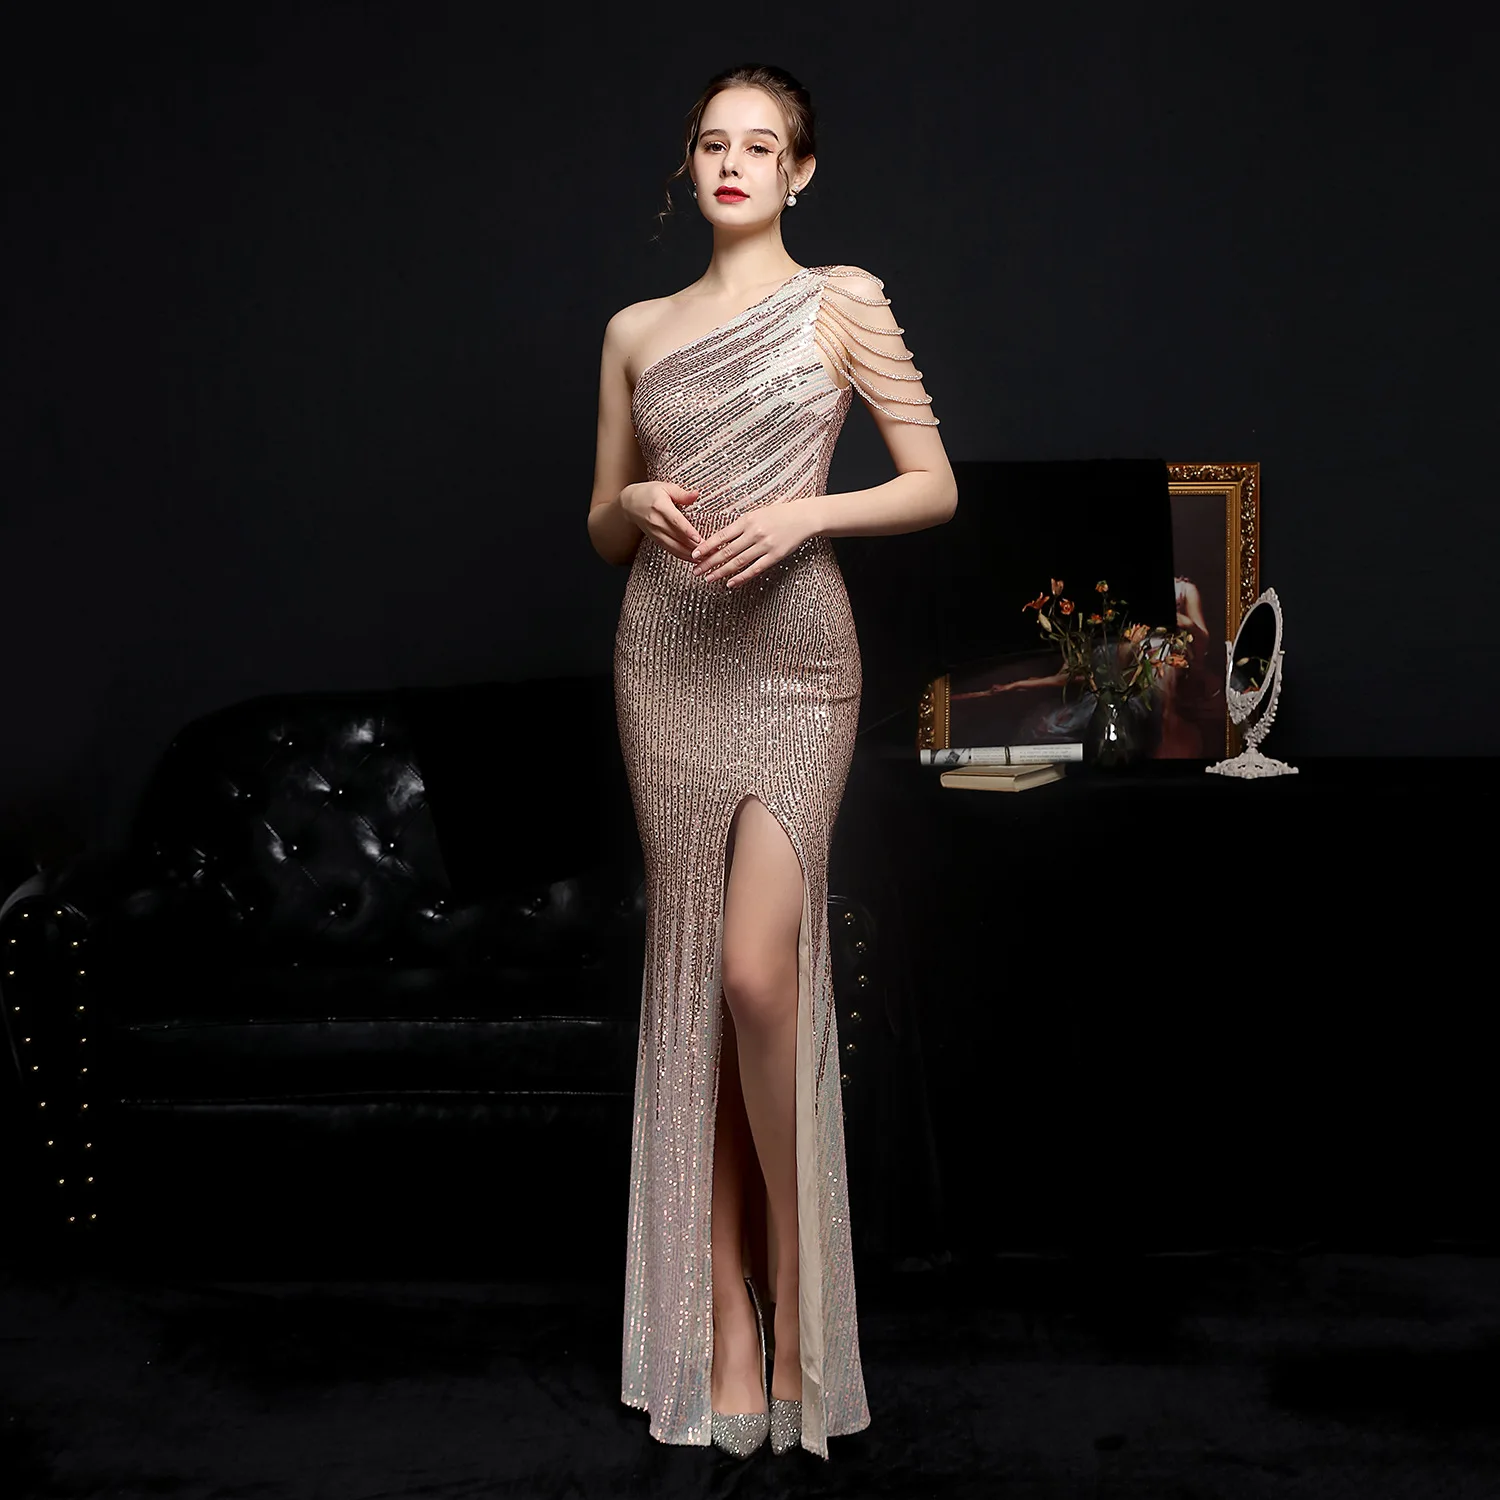 Gold Sequin &Bead One Shoulder Sleeveless Formal Special Occasion Dresses Women Party Night Club Wear Sexy Long Dress With Split